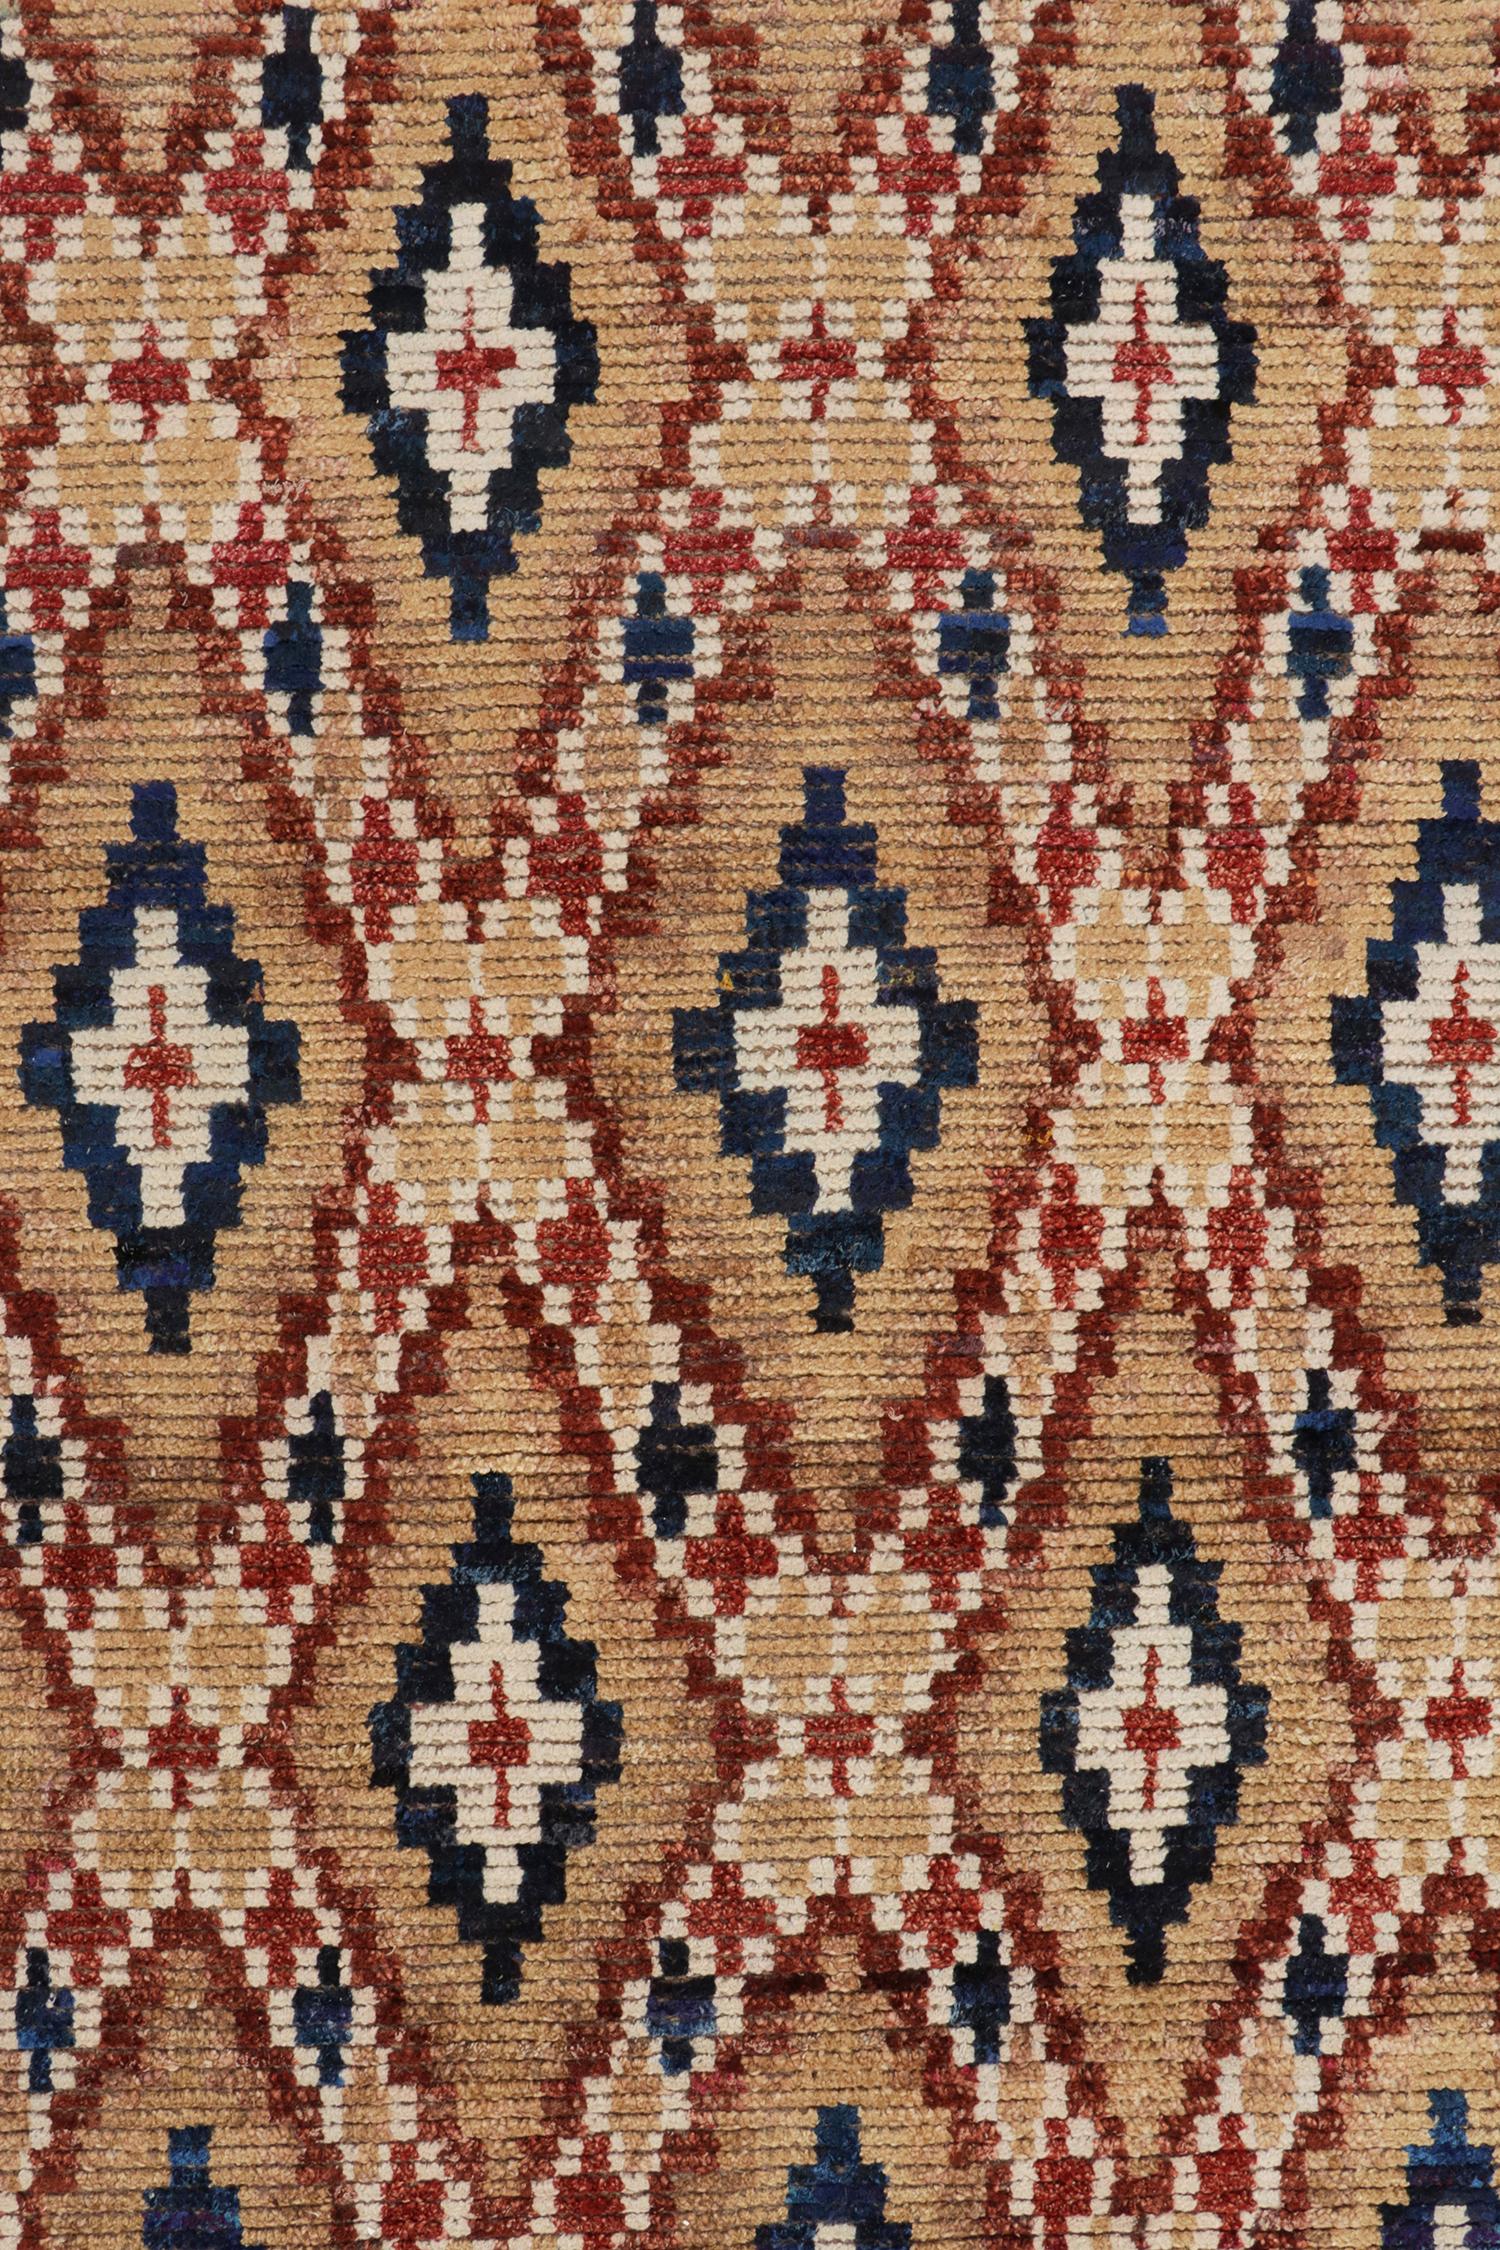 Hand-Knotted Rug & Kilim's Moroccan Style Rug in Beige-Brown, Red and Blue Diamond Patterns For Sale